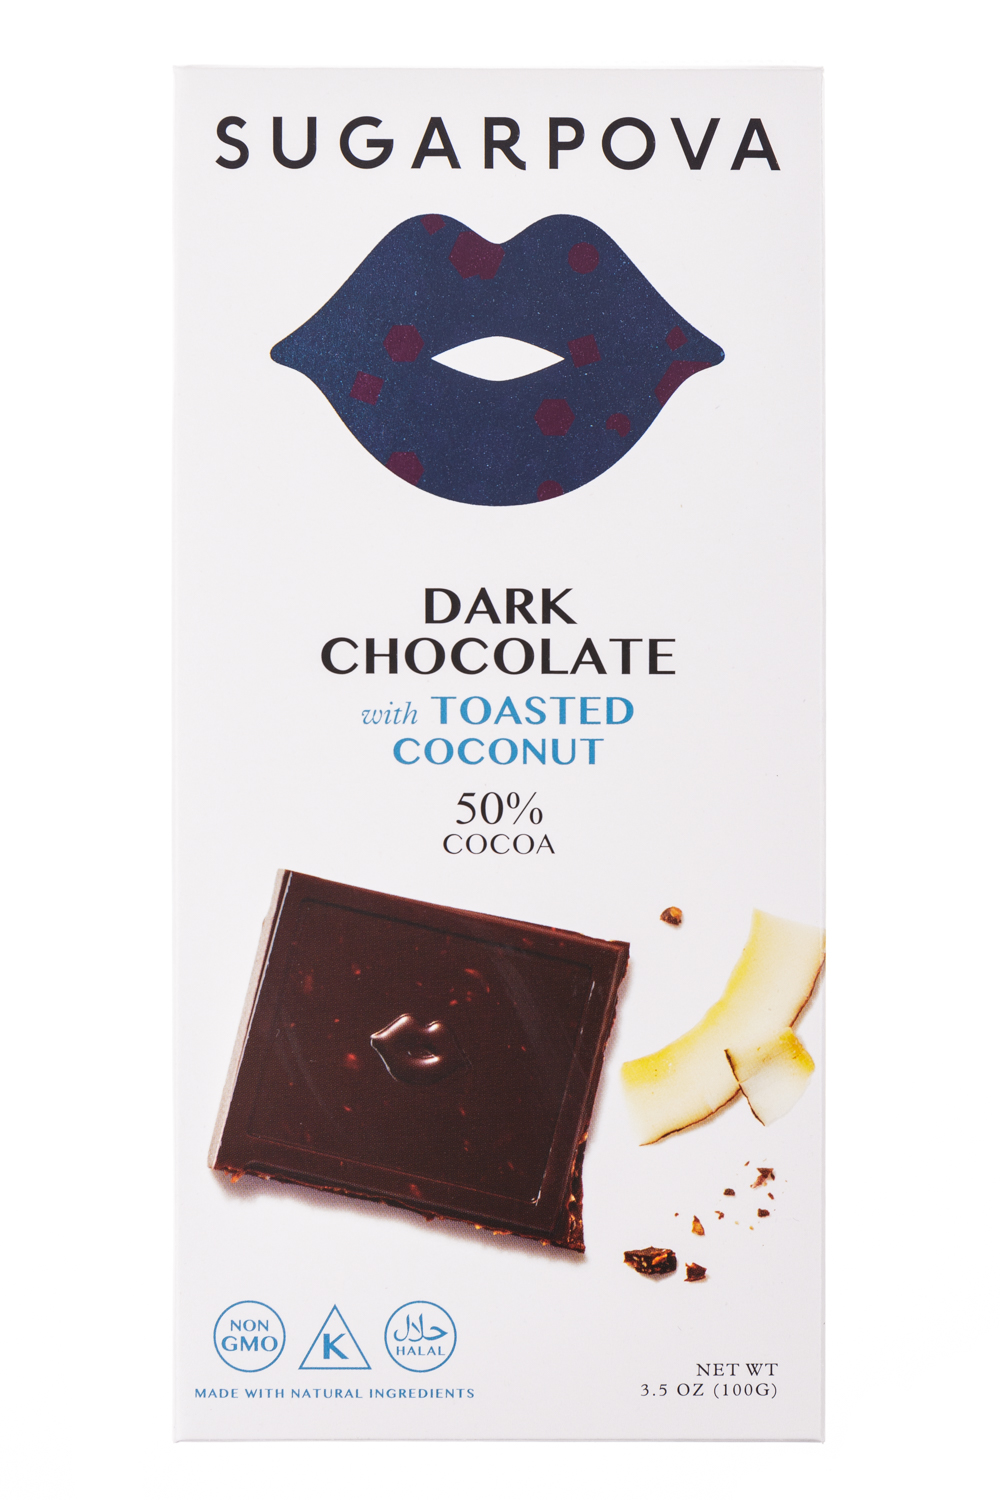 Dark Chocolate with Toasted Coconut